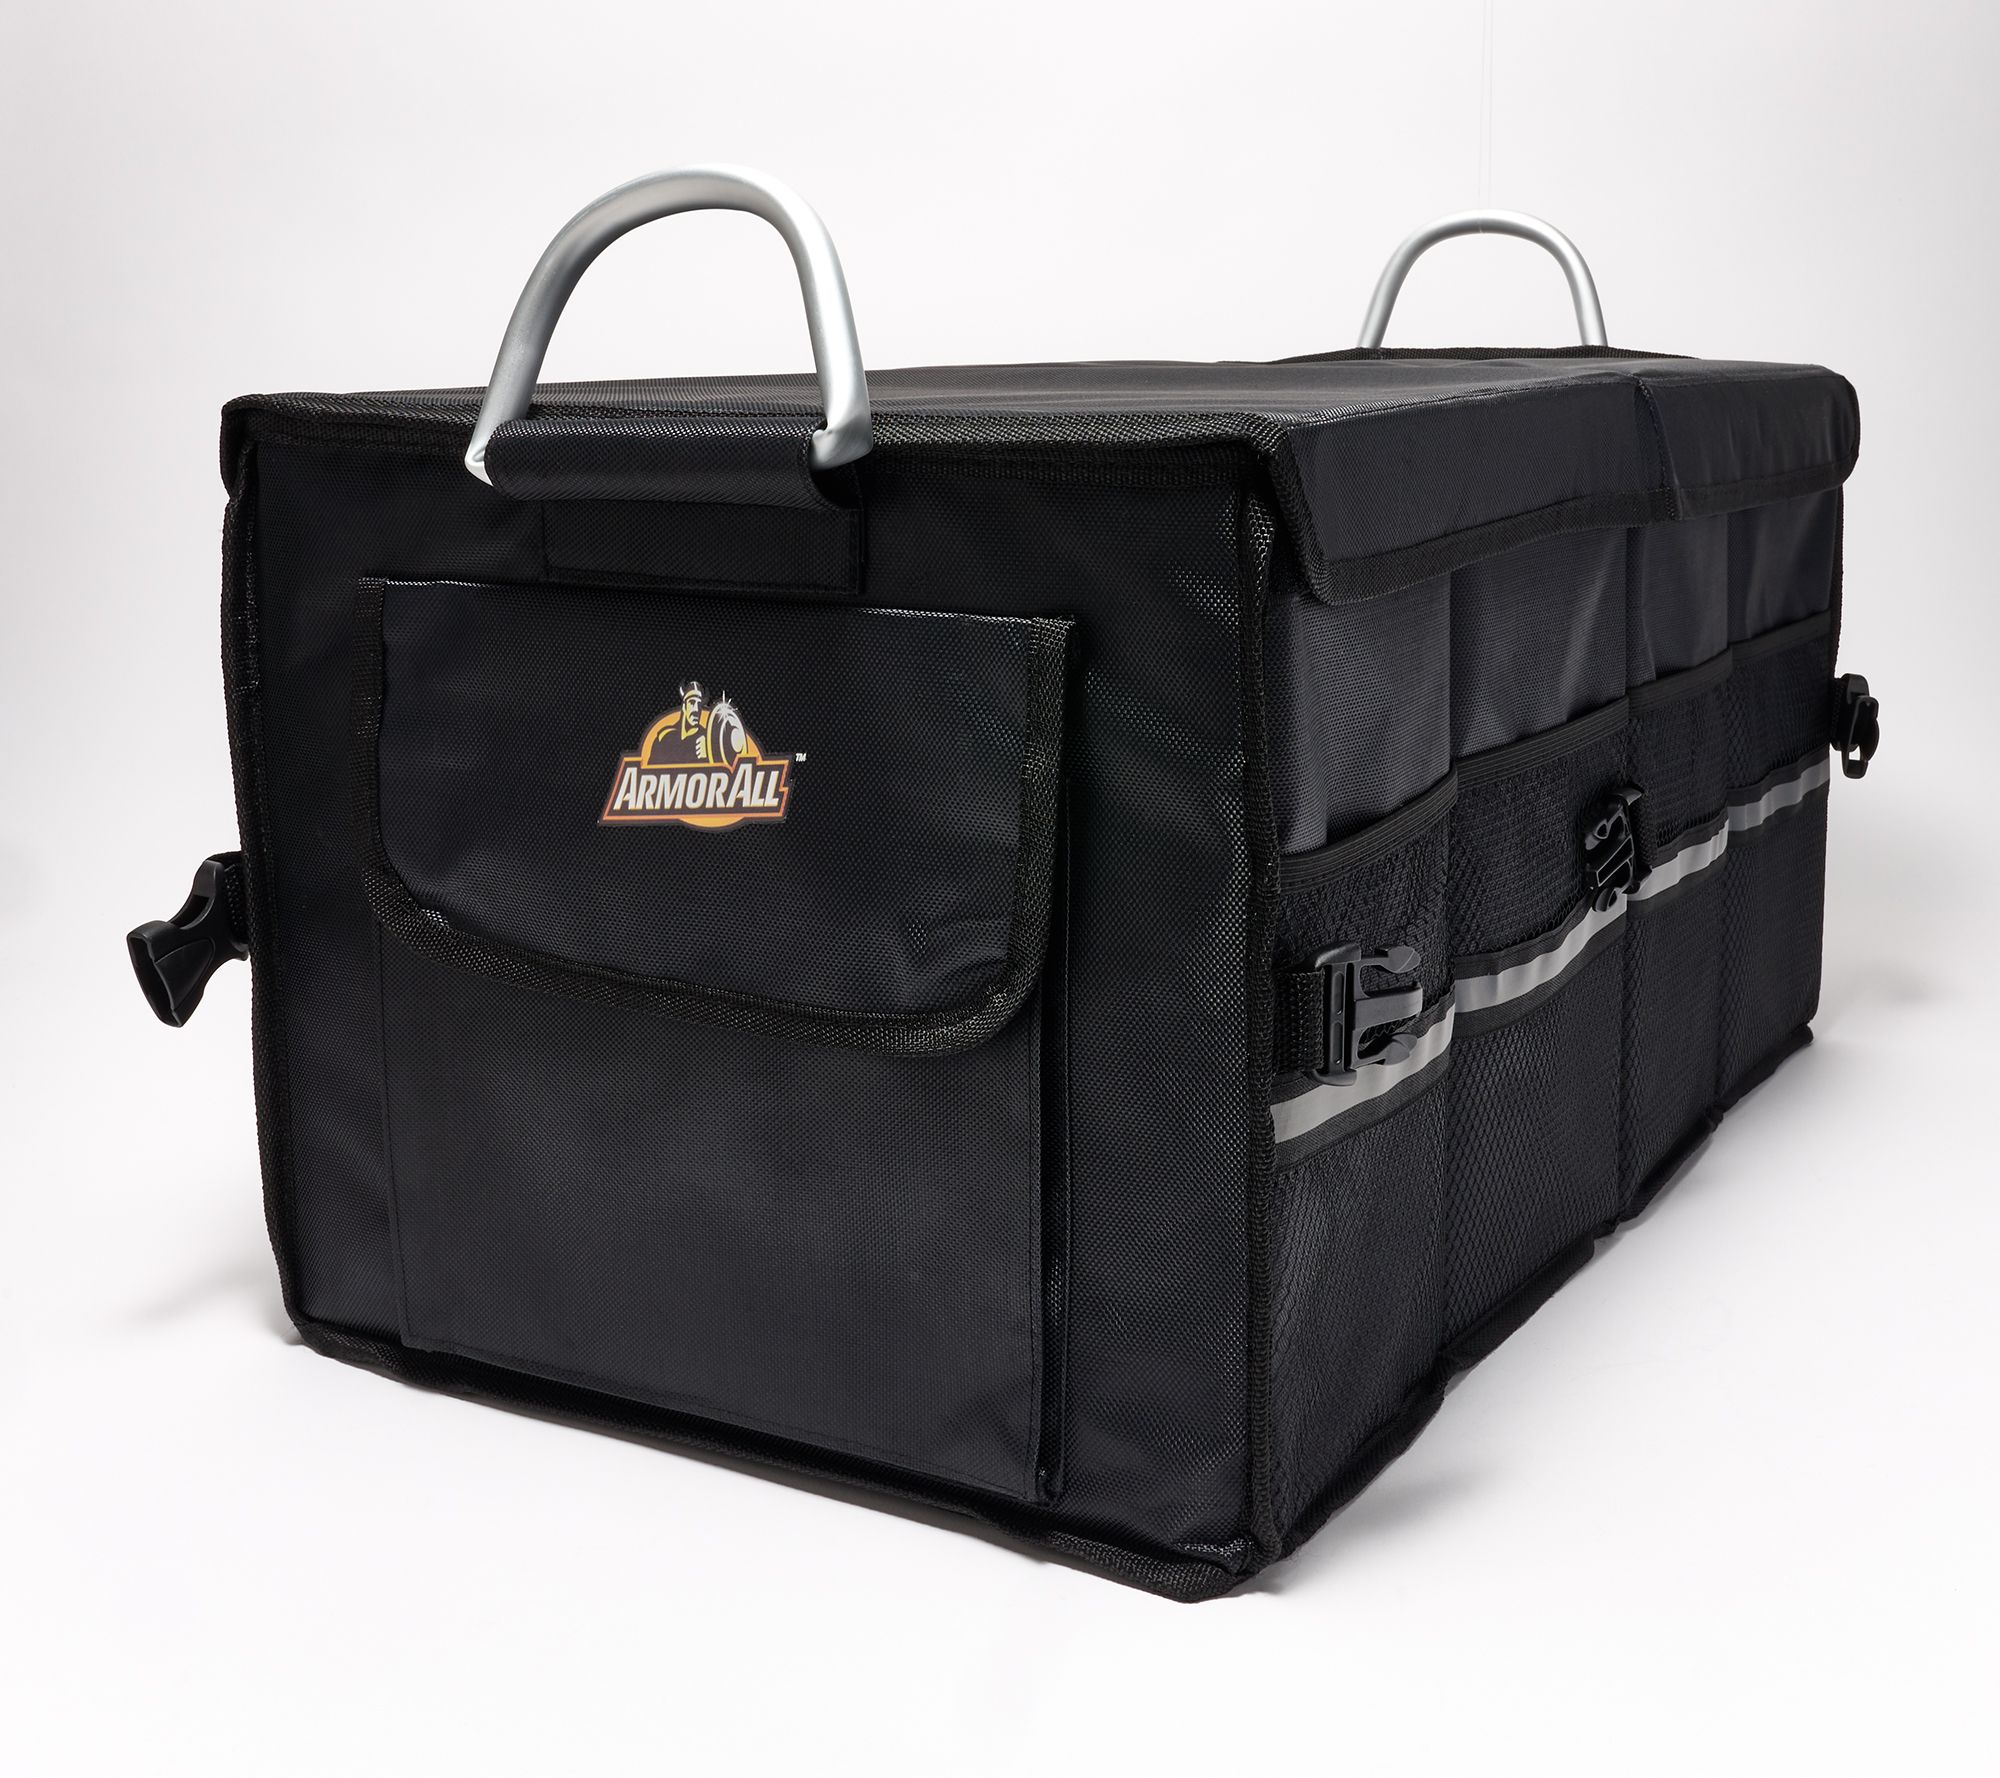 Armor All Trunk Storage Organizer with Lid & Aluminum Handles 